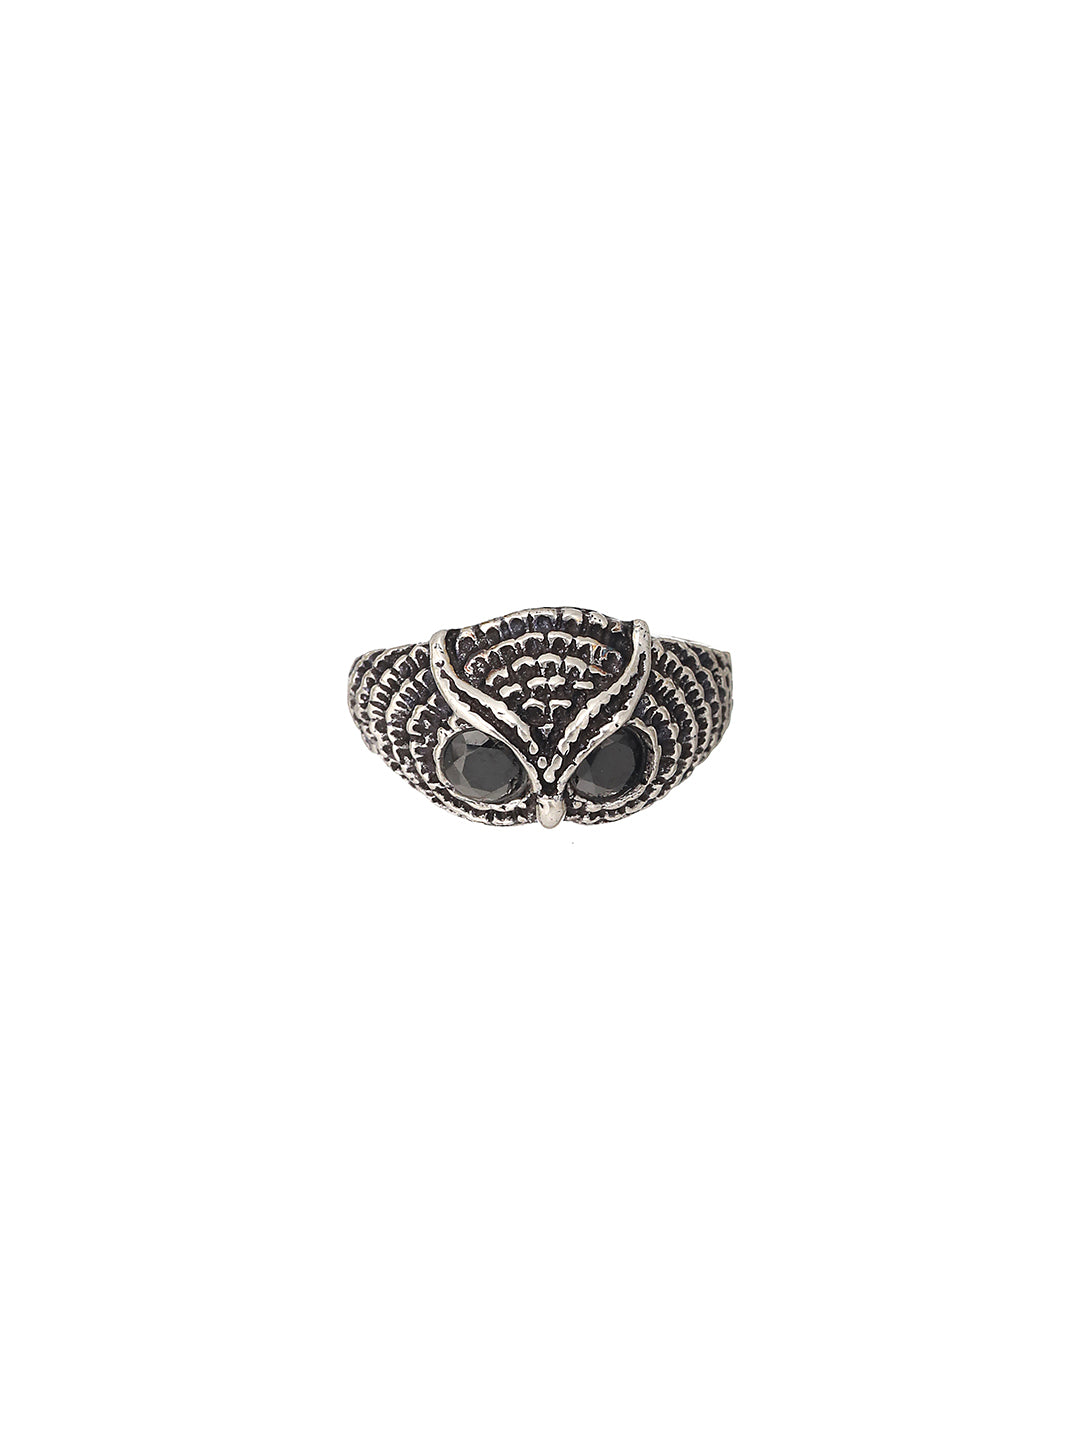 Bold by Priyaasi Black-Eyed Owl Studded Silver-Plated Ring for Men